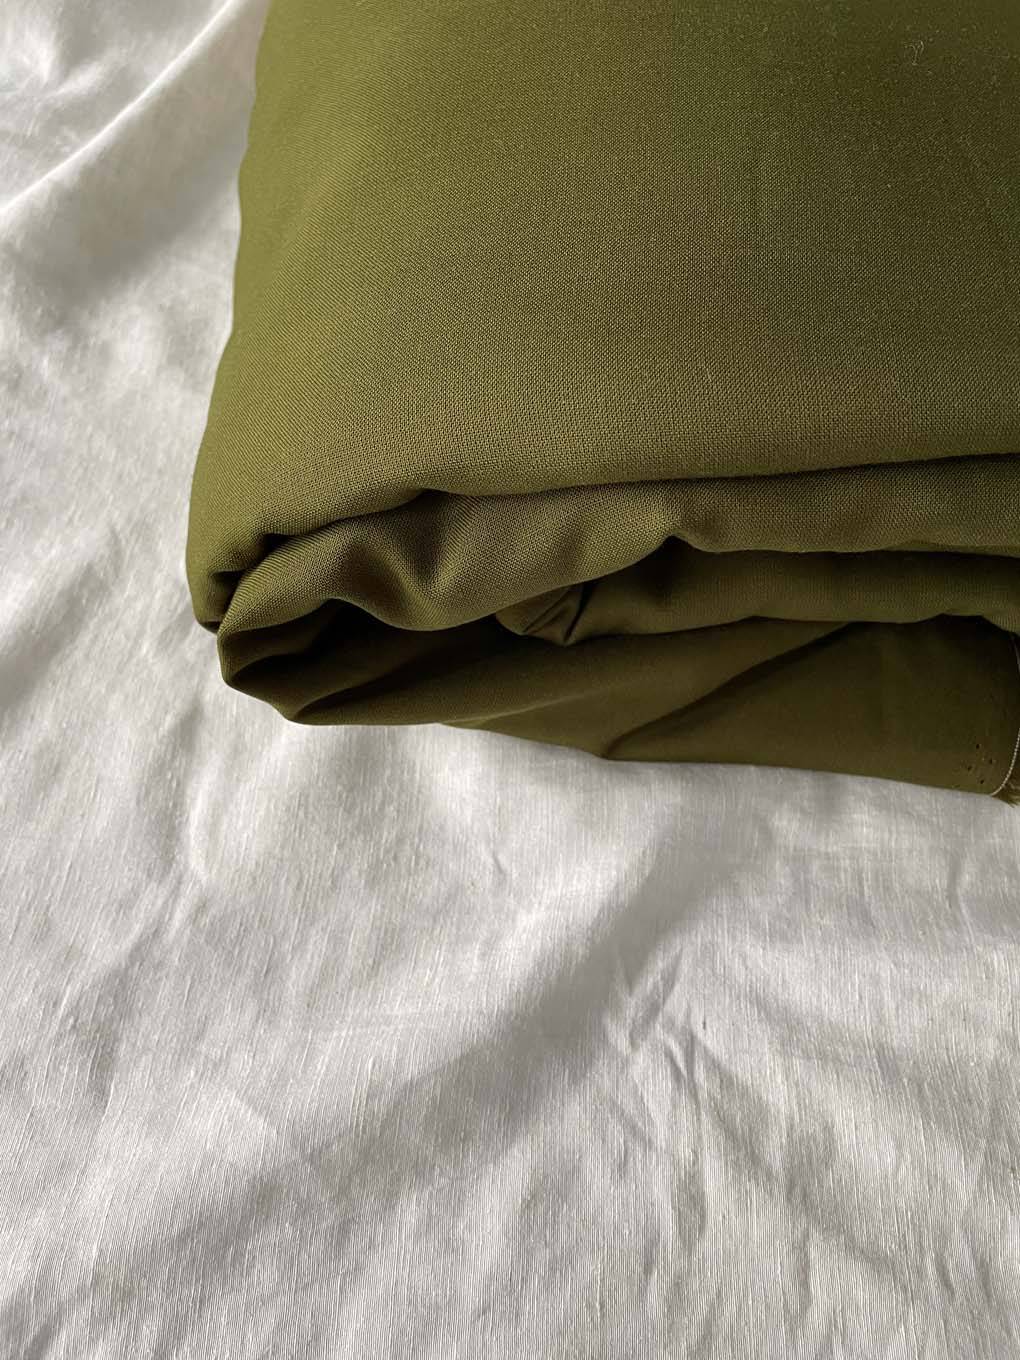 Fabric Pandit Cut Piece 0.25M (CUT PIECE) Olive Green Color Pure Rayon Fabric